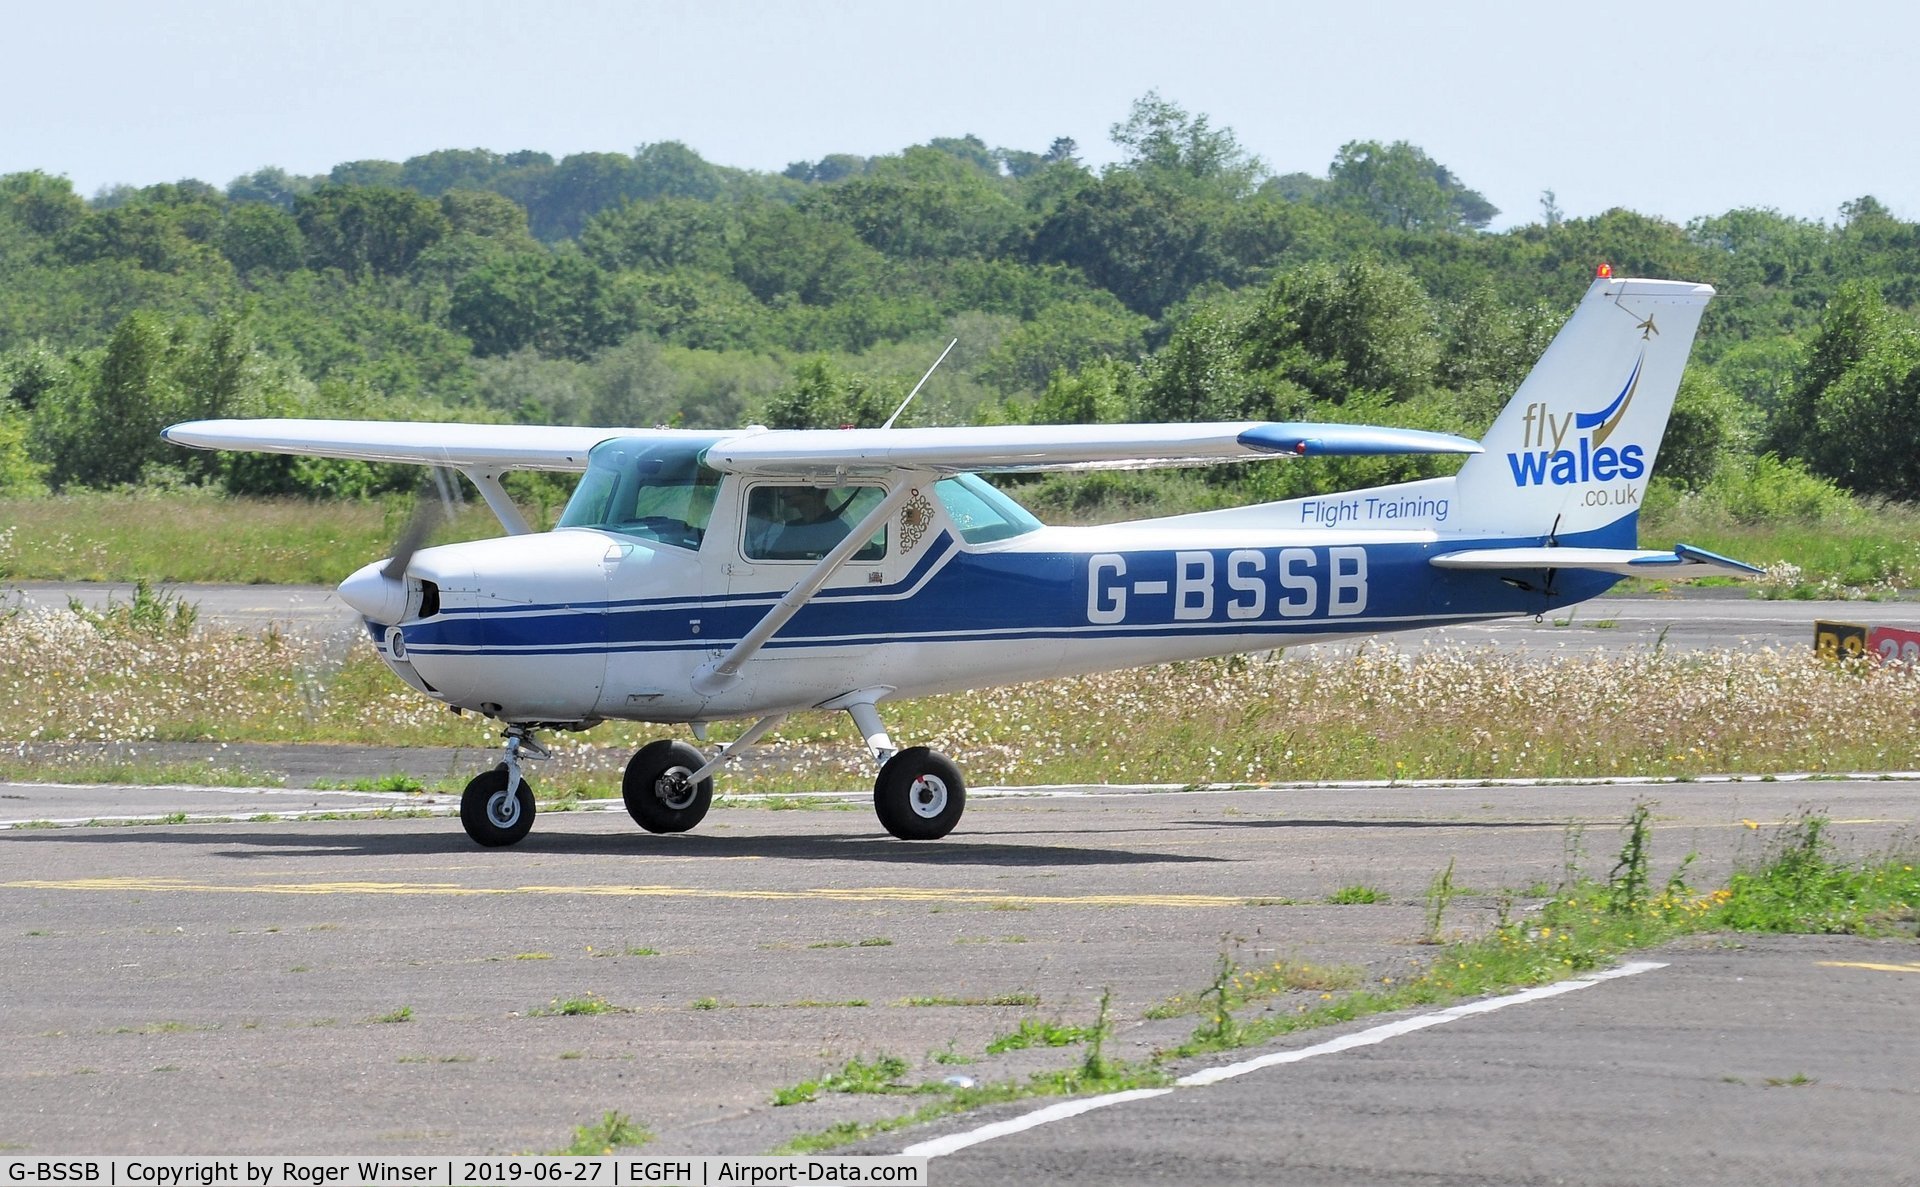 G-BSSB, 1972 Cessna 150L C/N 150-74147, Visiting 150L operated by FlyWales .